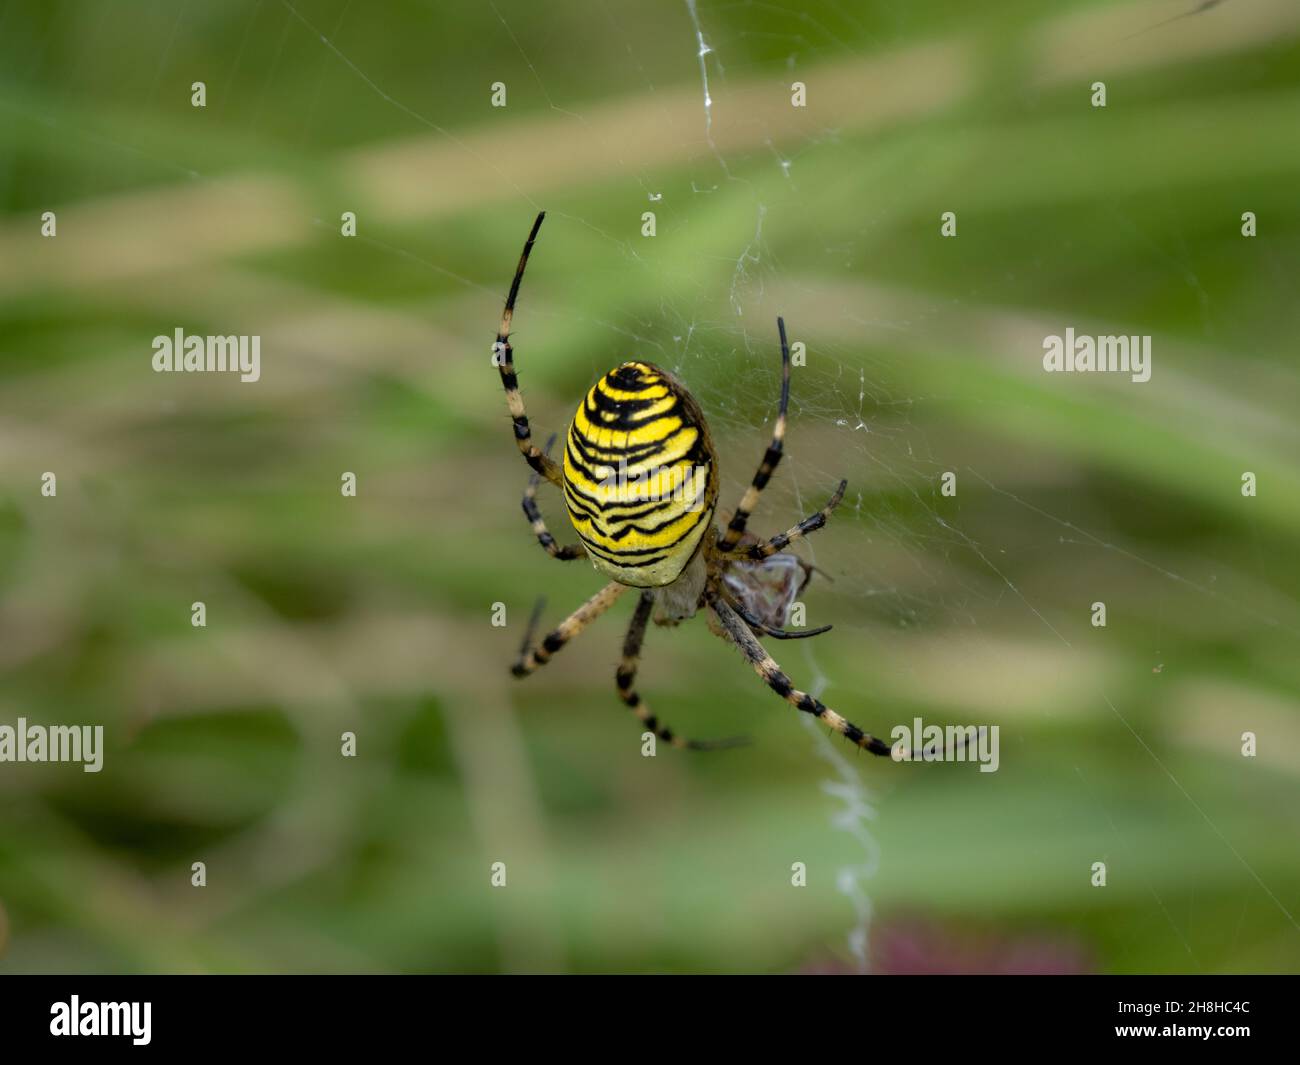 Wasp Spider Predating a Male Wasp Spider aftre Mating Stock Photo